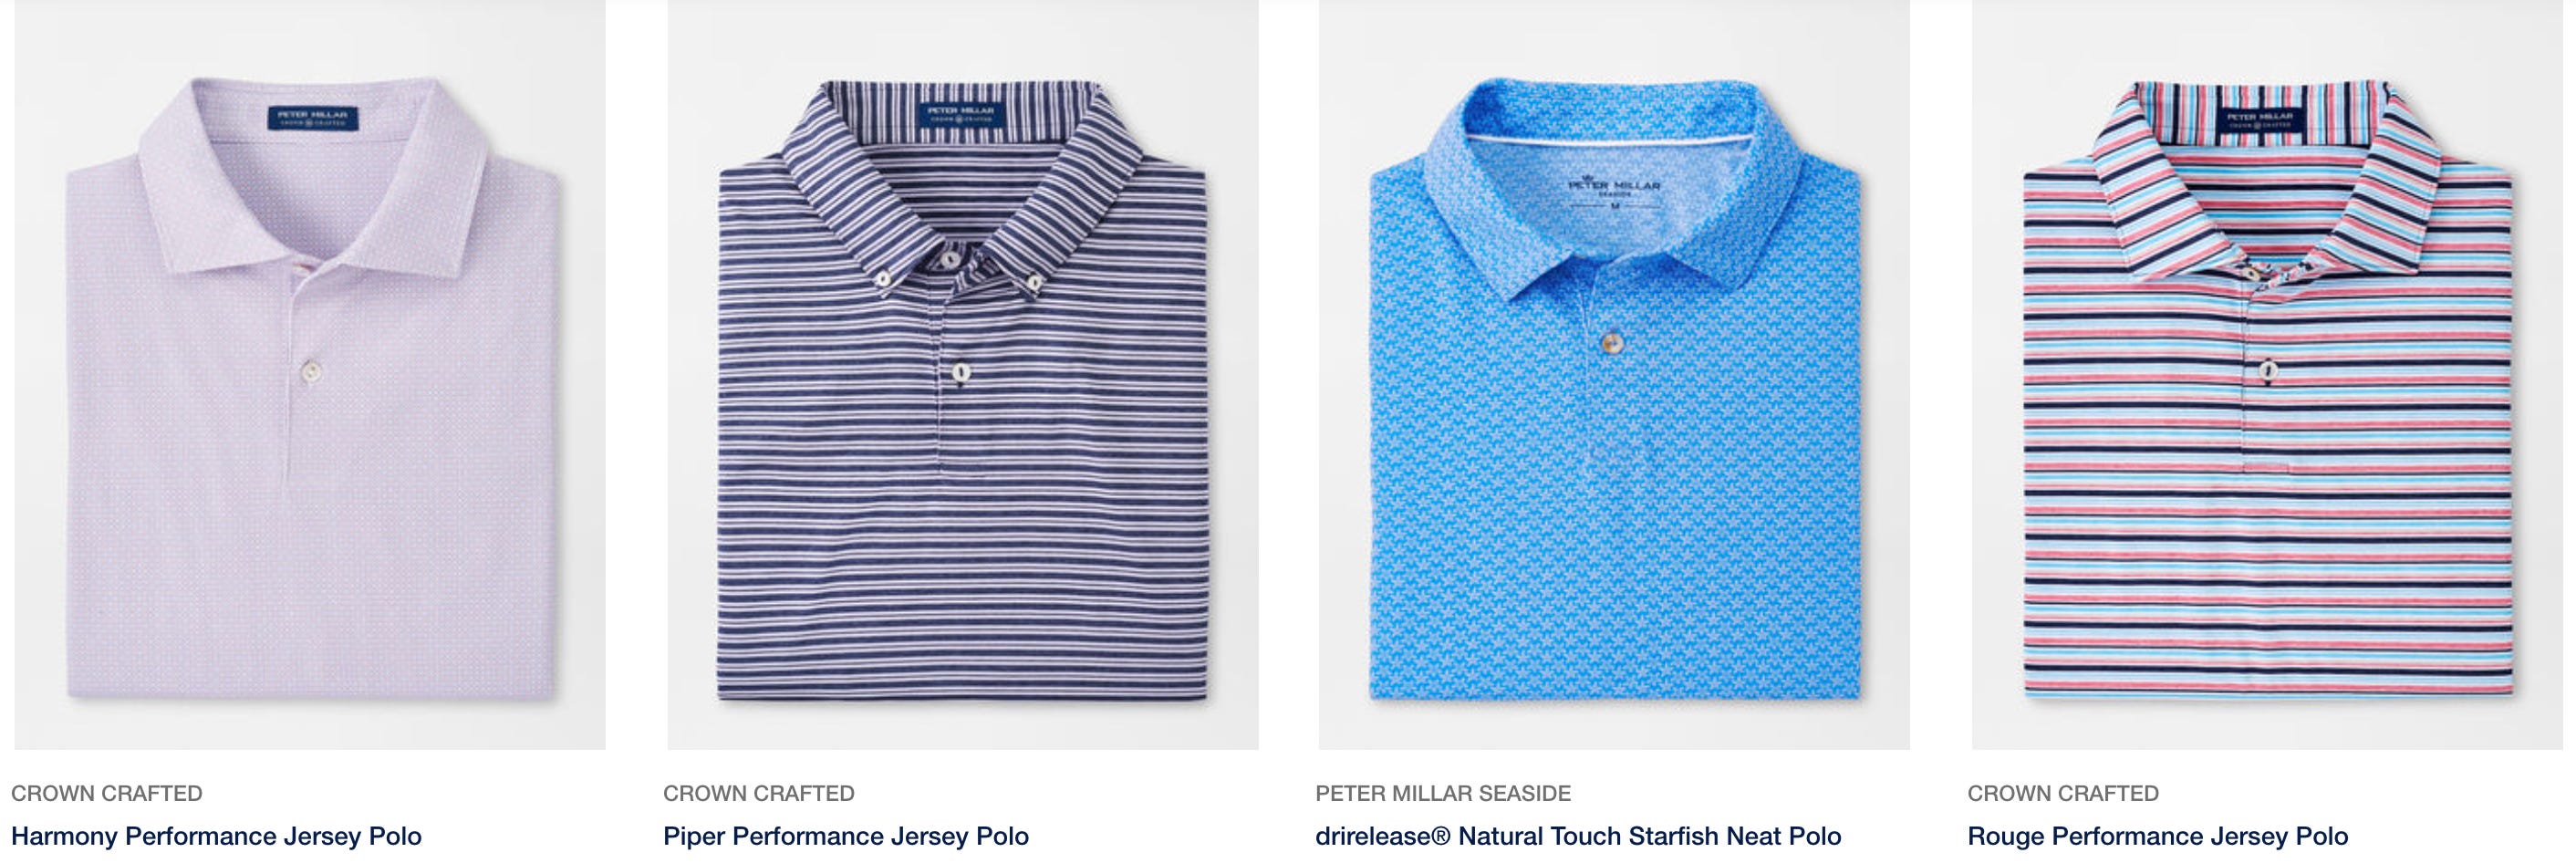 Peter Millar Review: Best Men's Clothing, Fashion Gifts for 2023